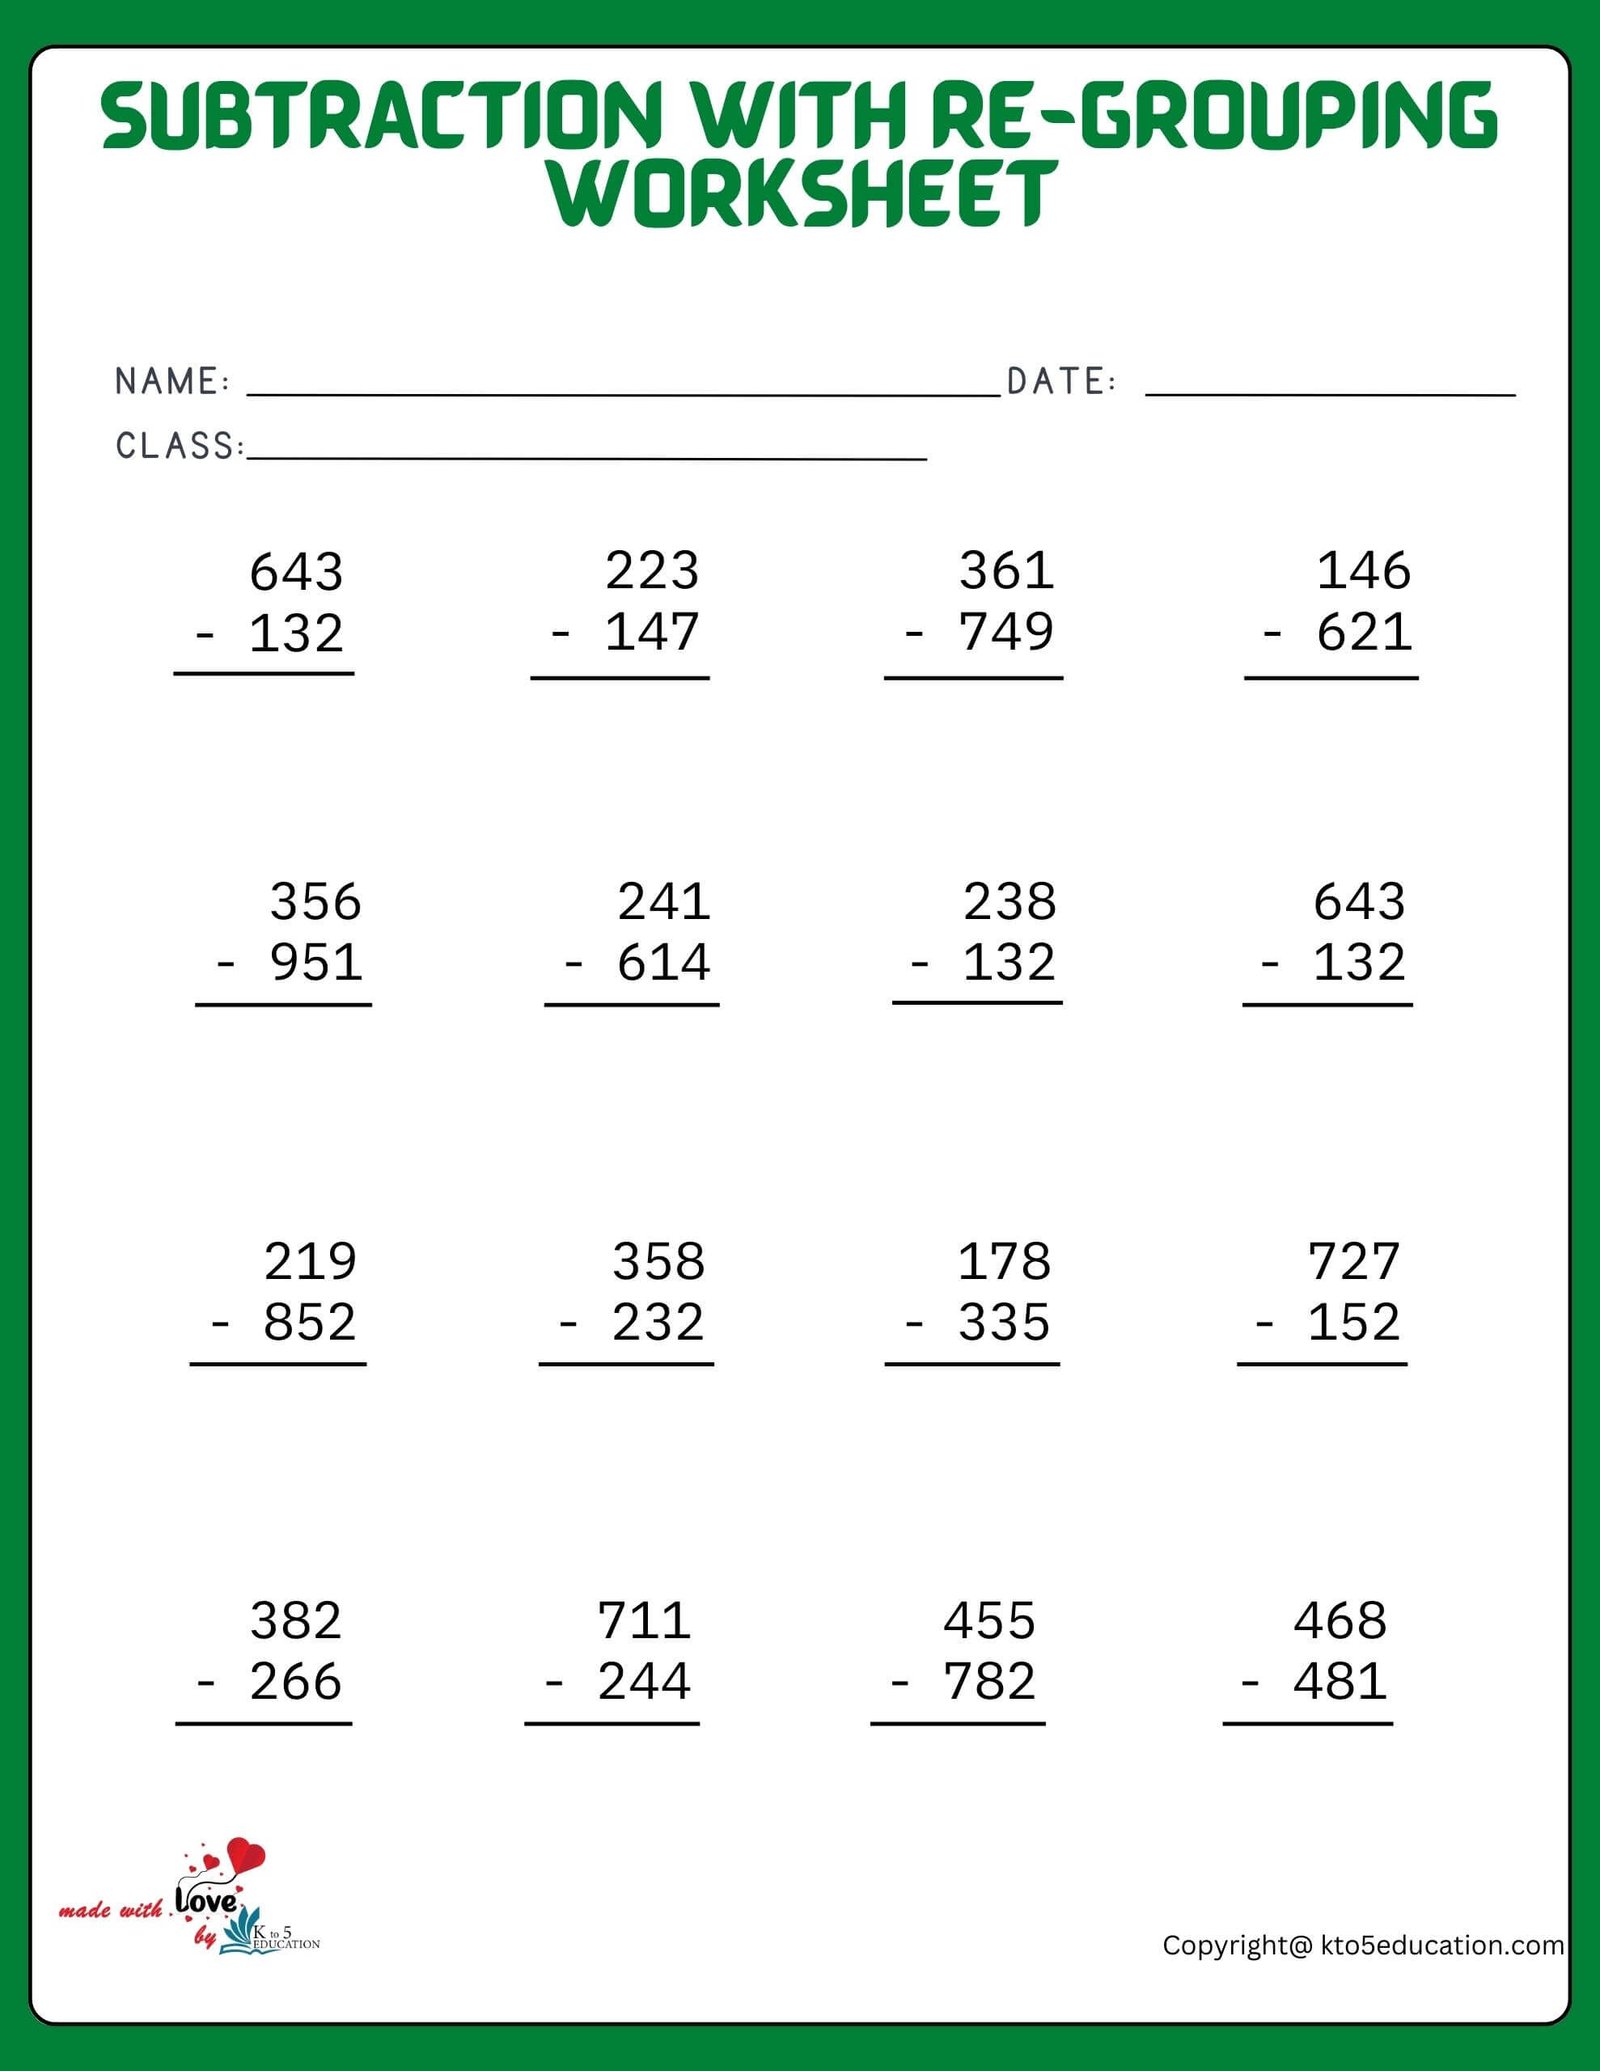 Subtraction With Re-Grouping Worksheet For Kids